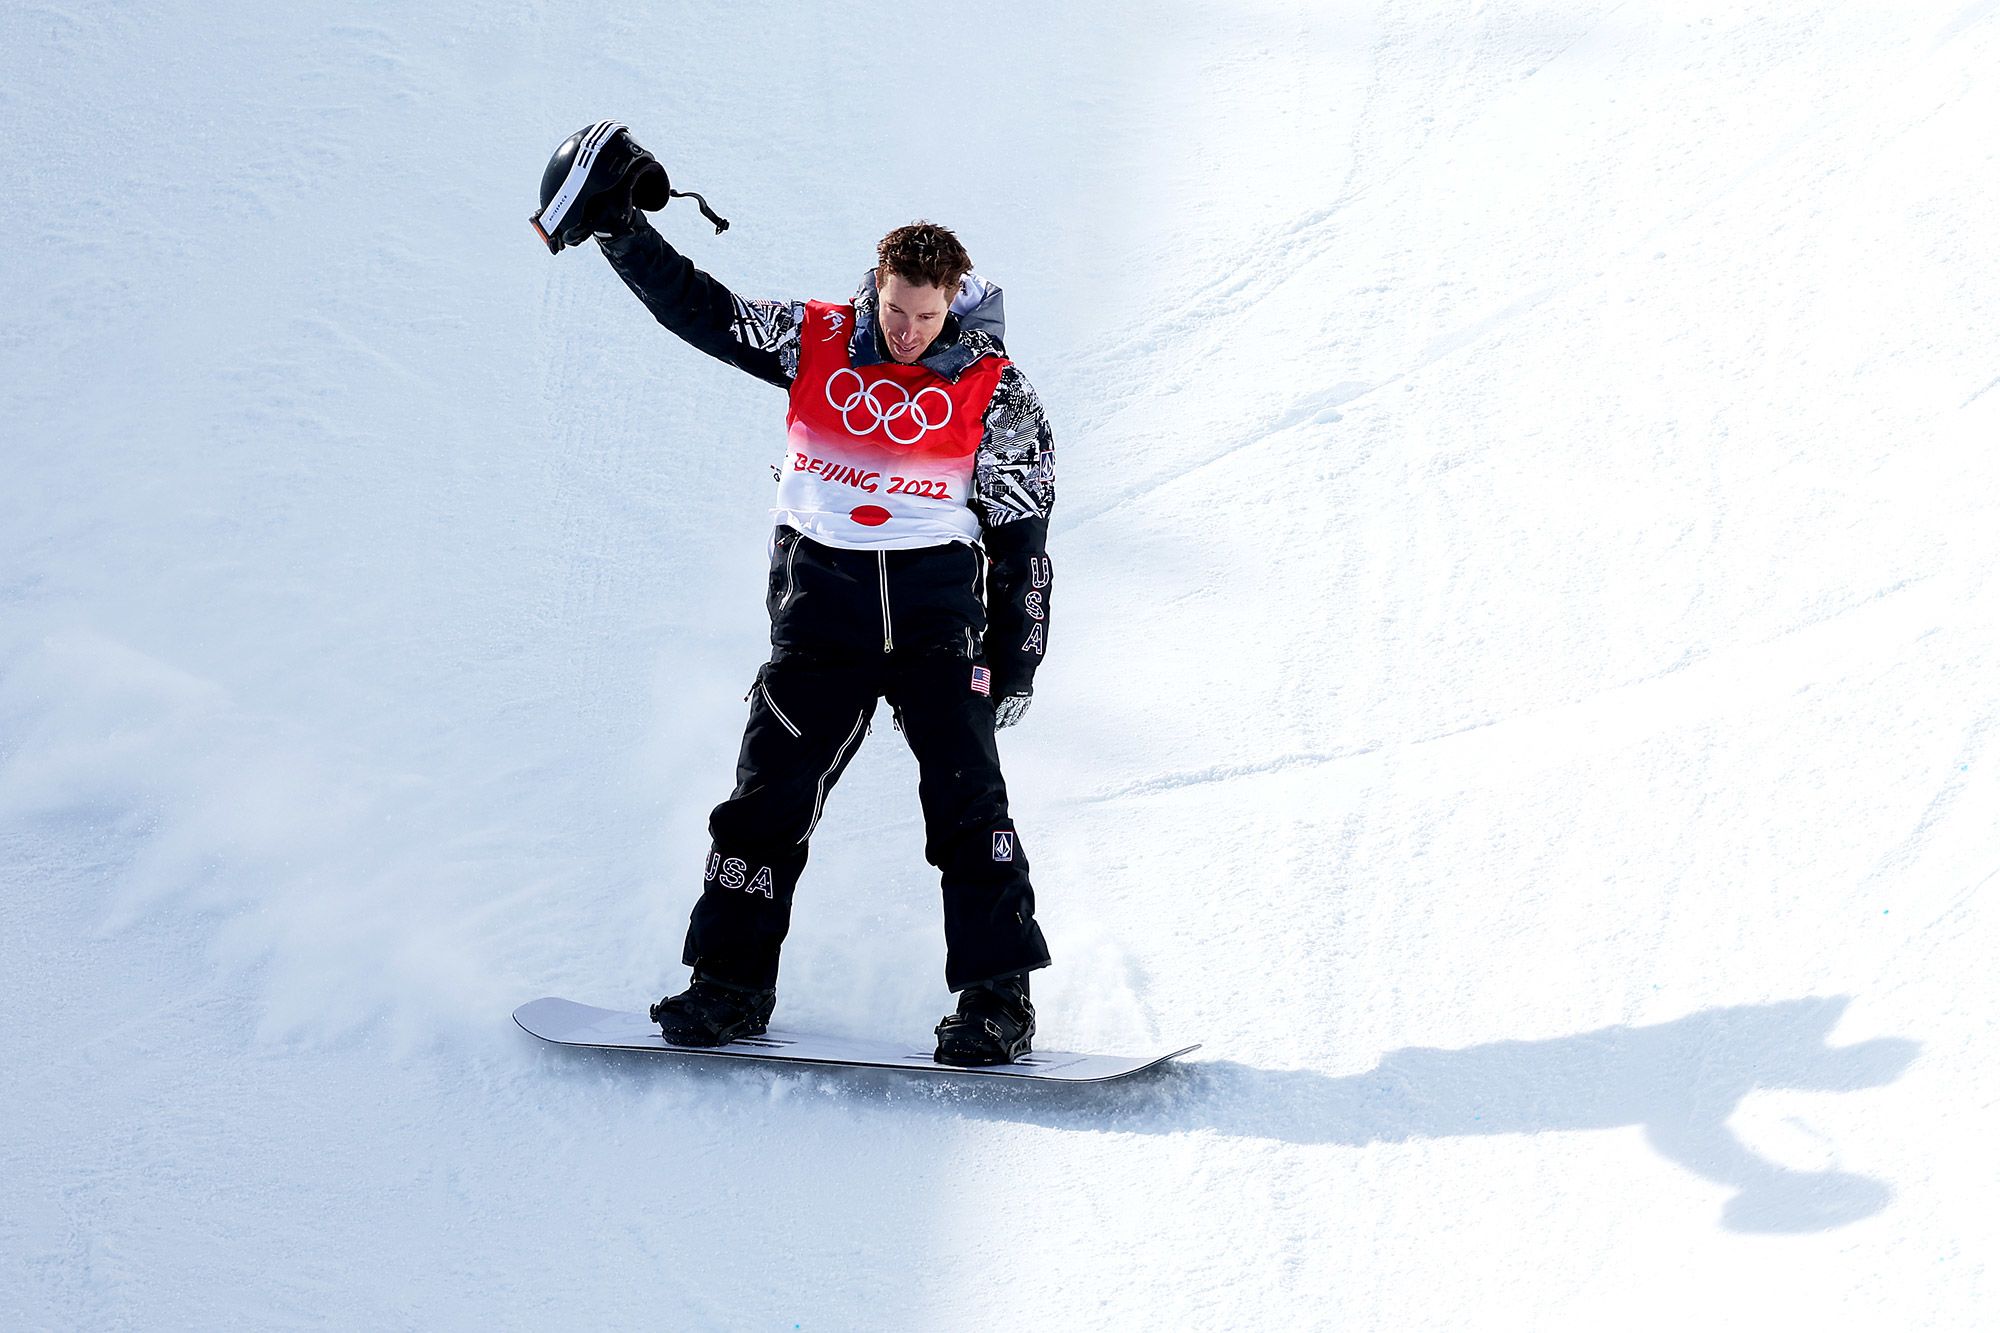 Olympic icon Shaun White at American Dream Big Snow with teens